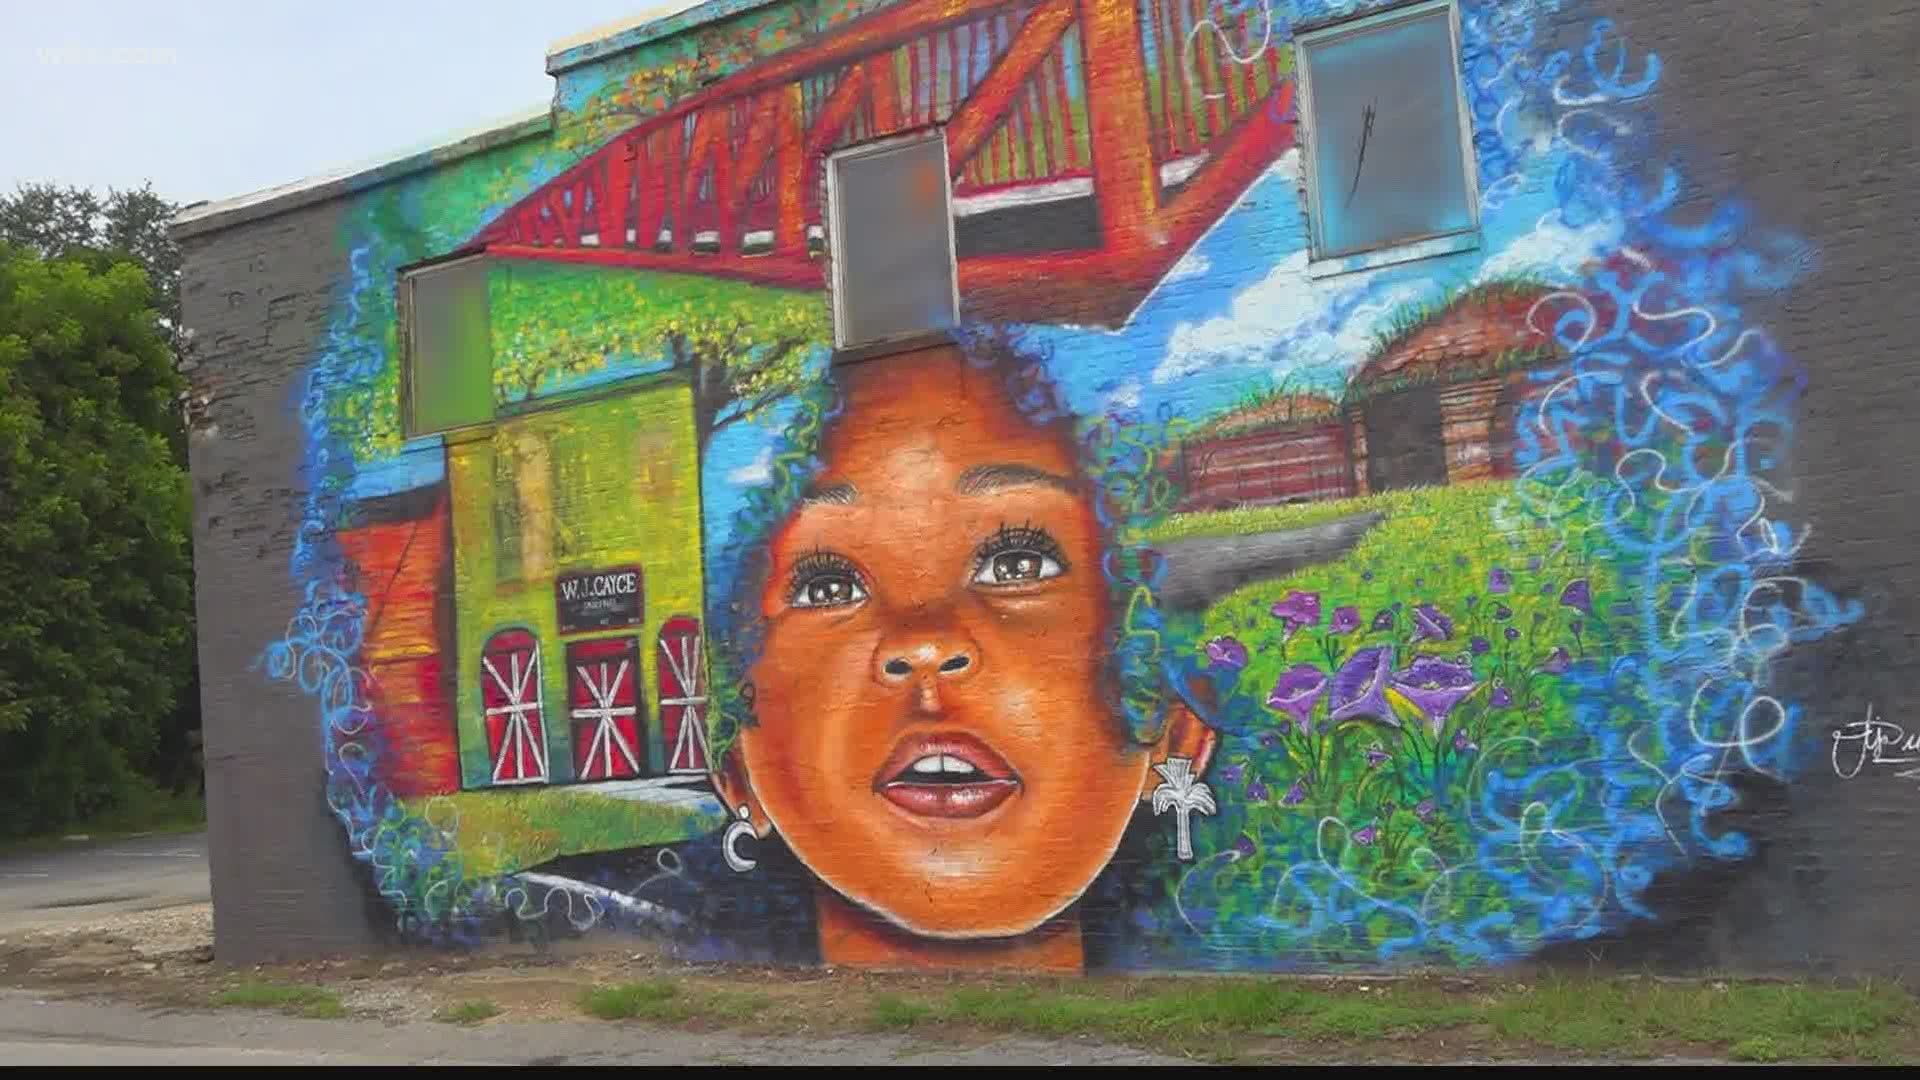 About a year ago, the city launched an initiative to hire artists for murals on the south end of State Street.